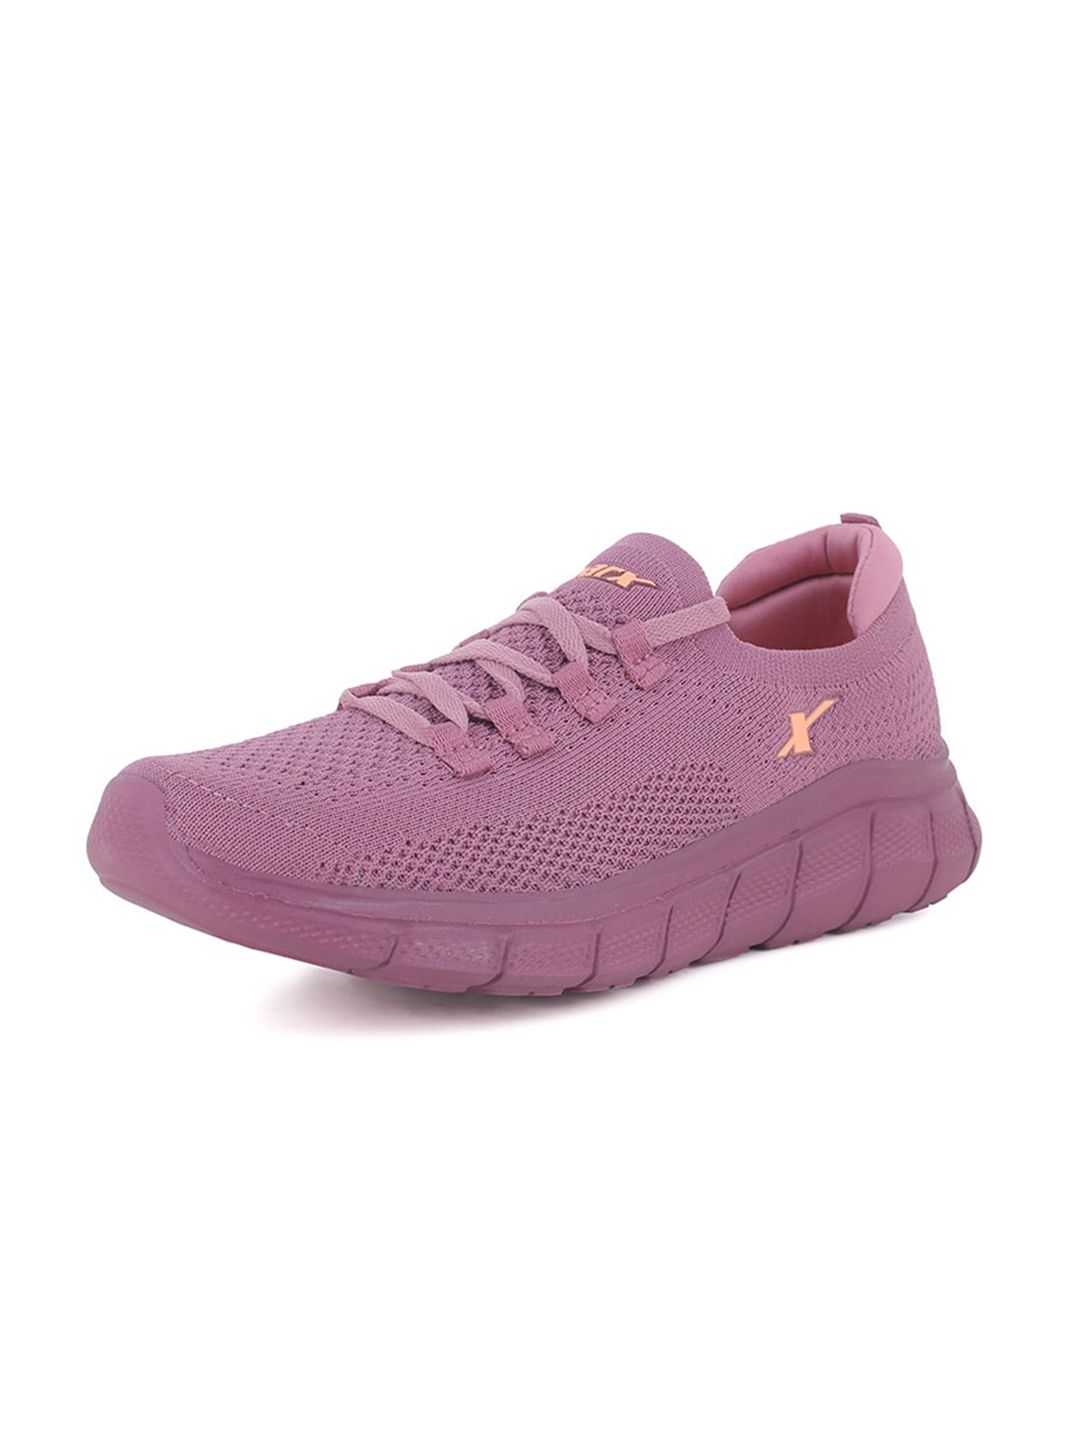 Sparx Women Lace-Ups Running Non-Marking Sports Shoes Price in India